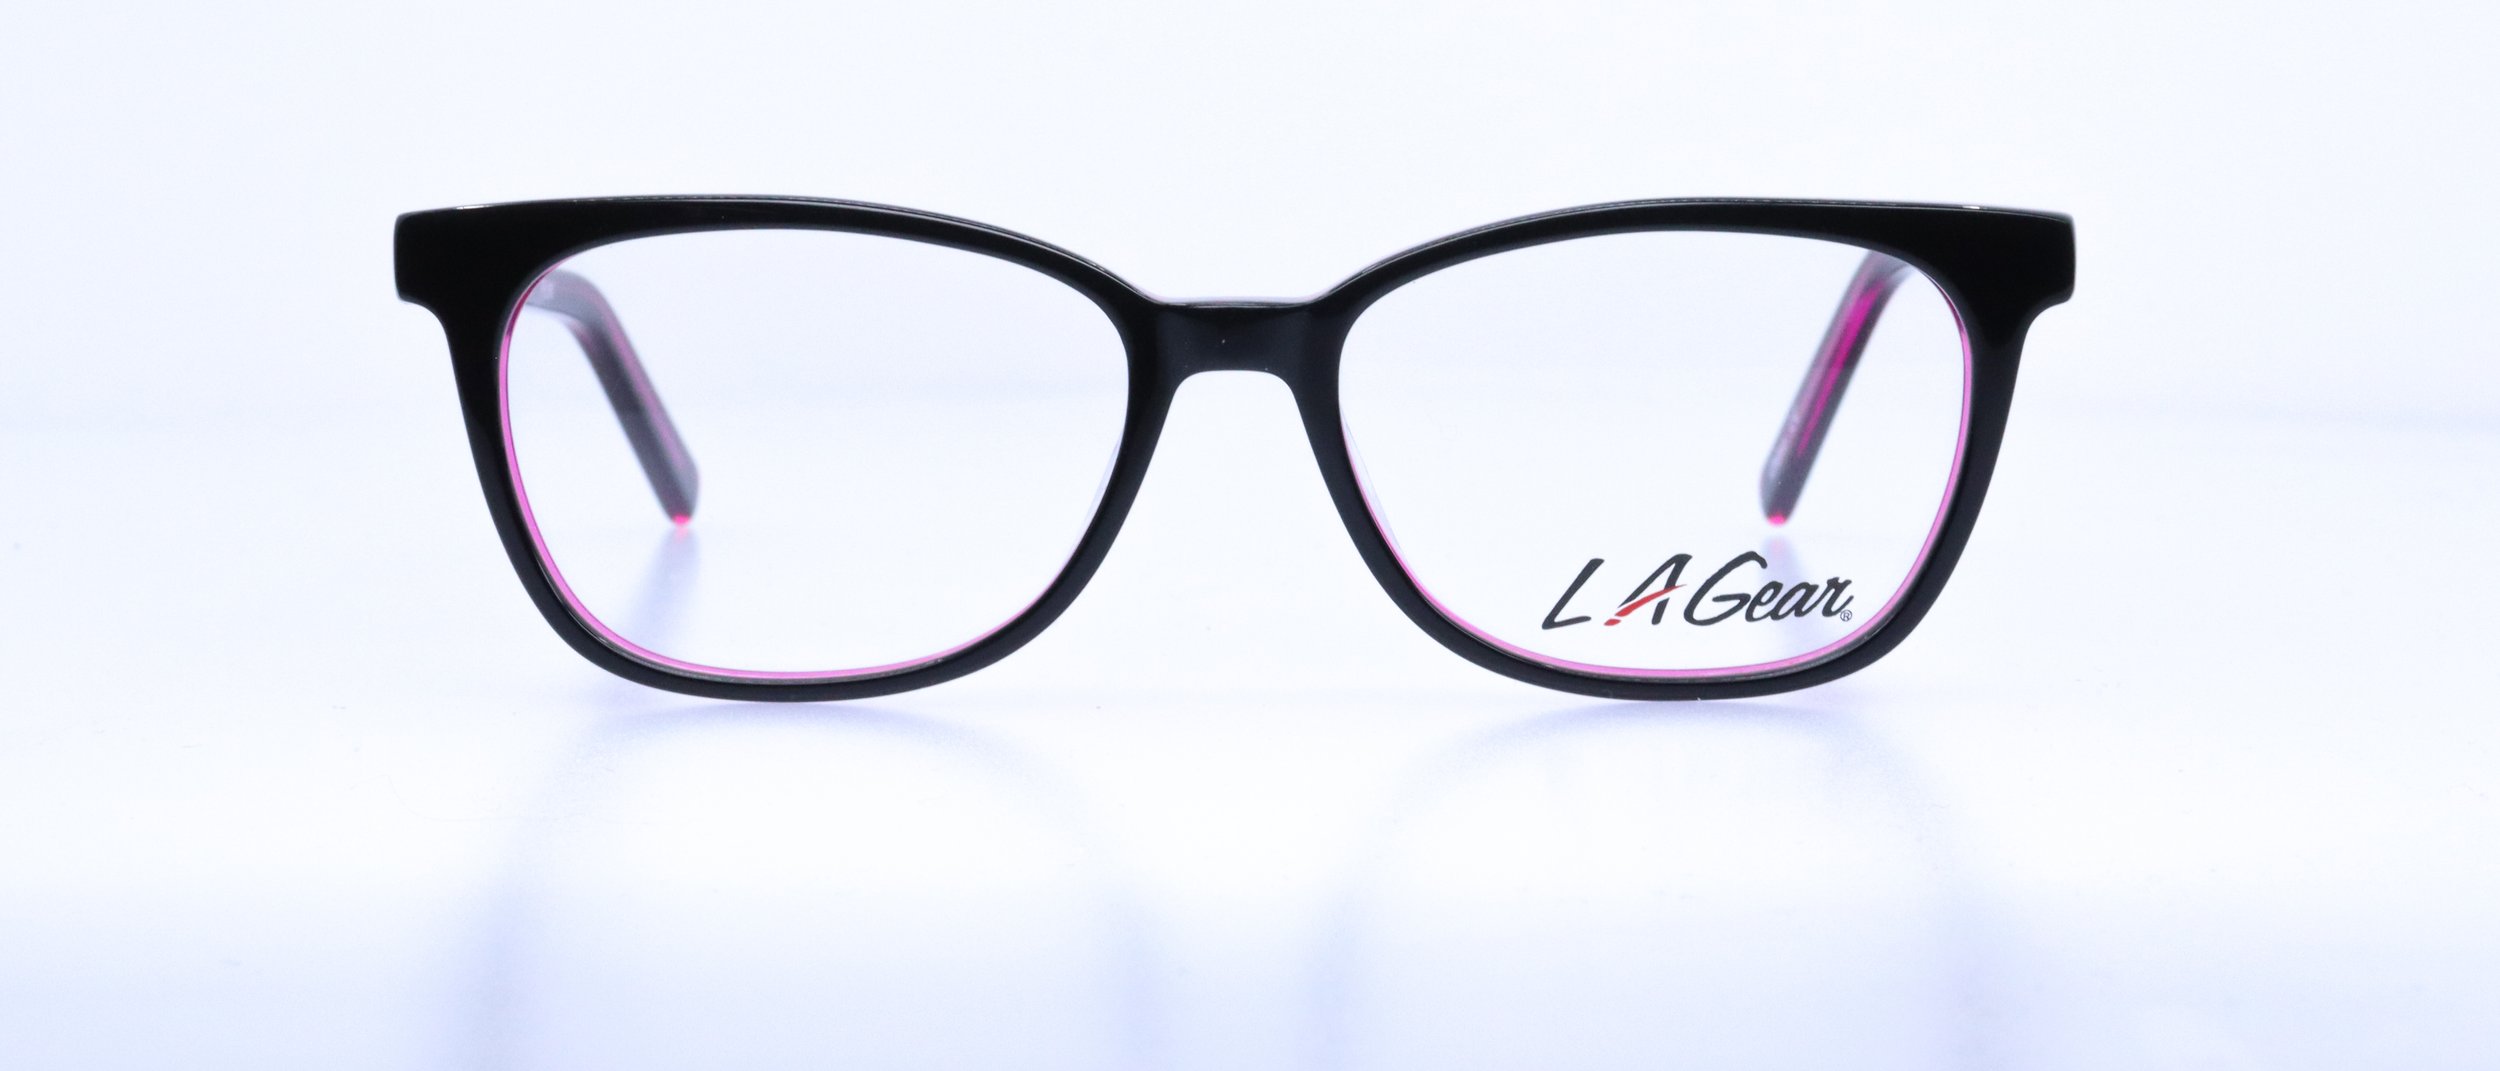  Del Rio: 51-16-135, Available in Plum or Tortoise/Blue 